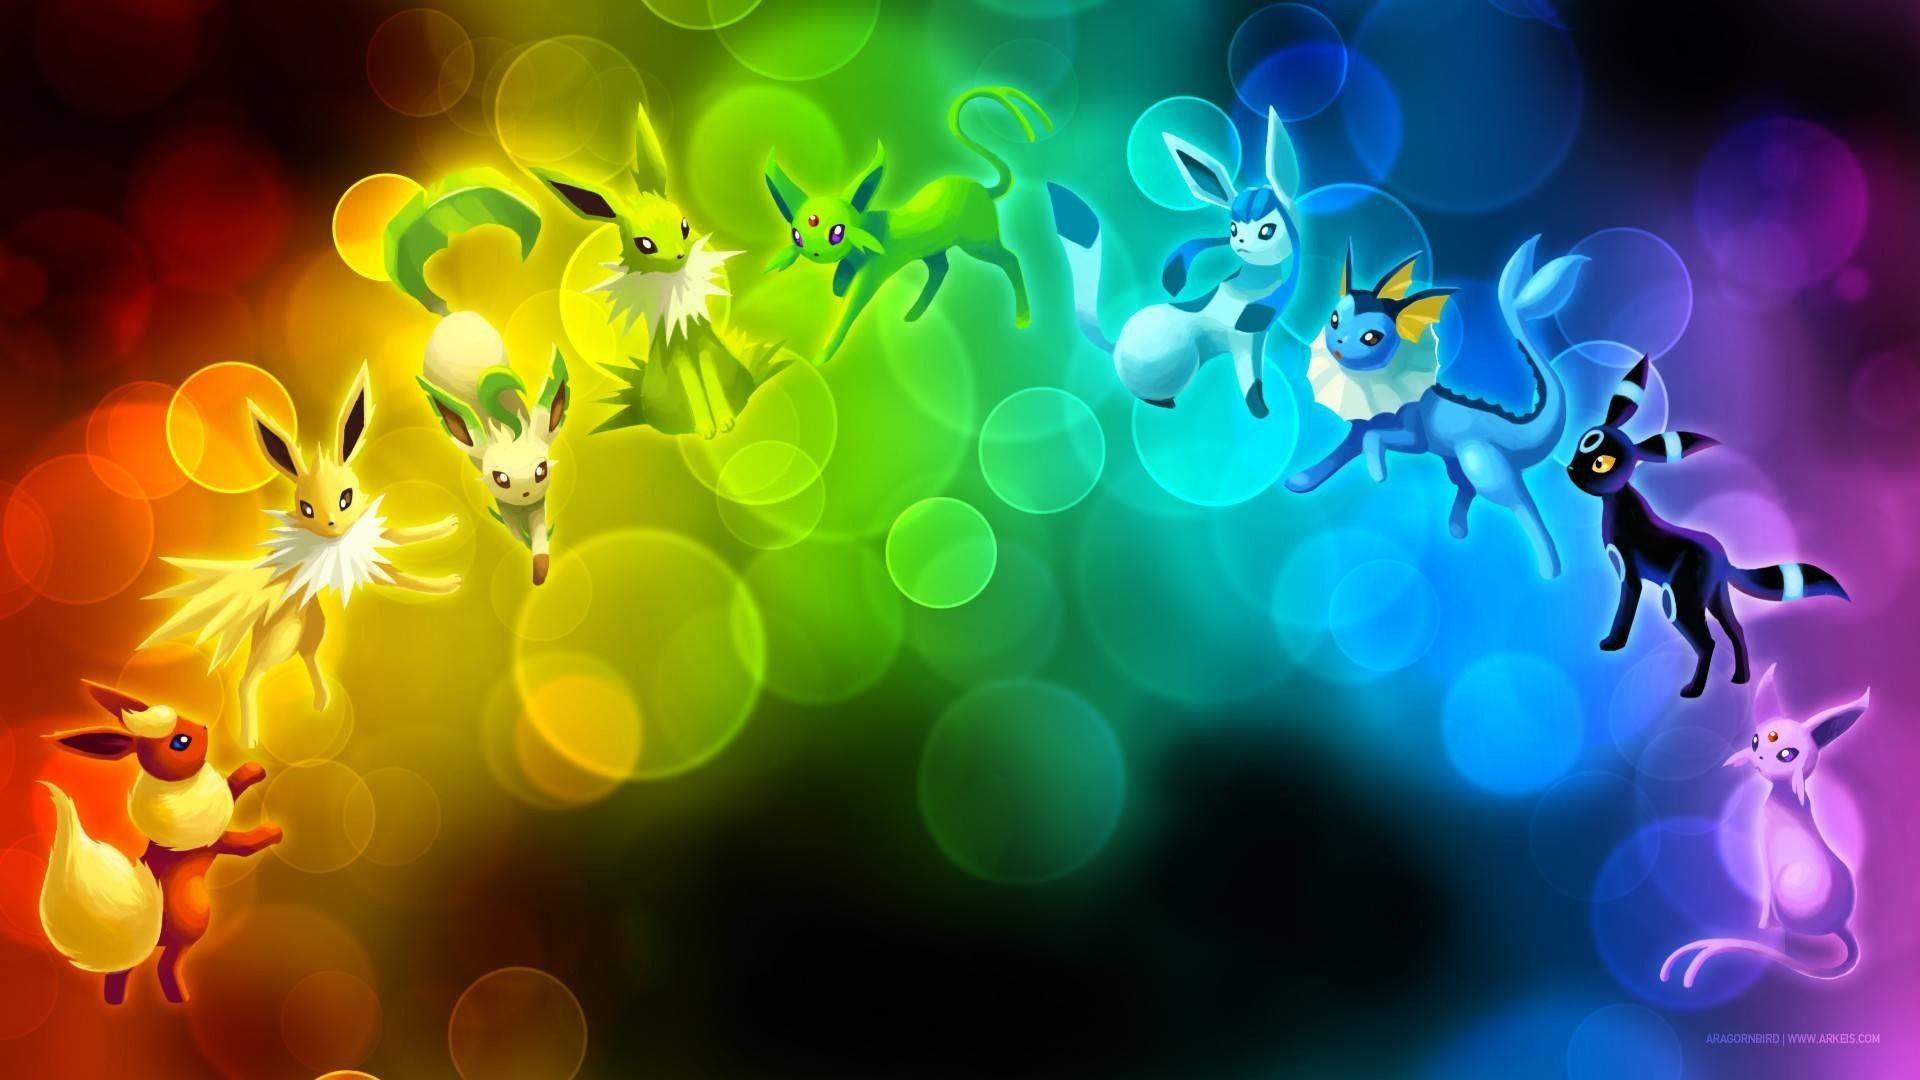 1920x1080  Cute Pokemon Wallpapers (73+ images)"> Â· Download Â· 1280x800 Cute  Pokemon Wallpaper ...